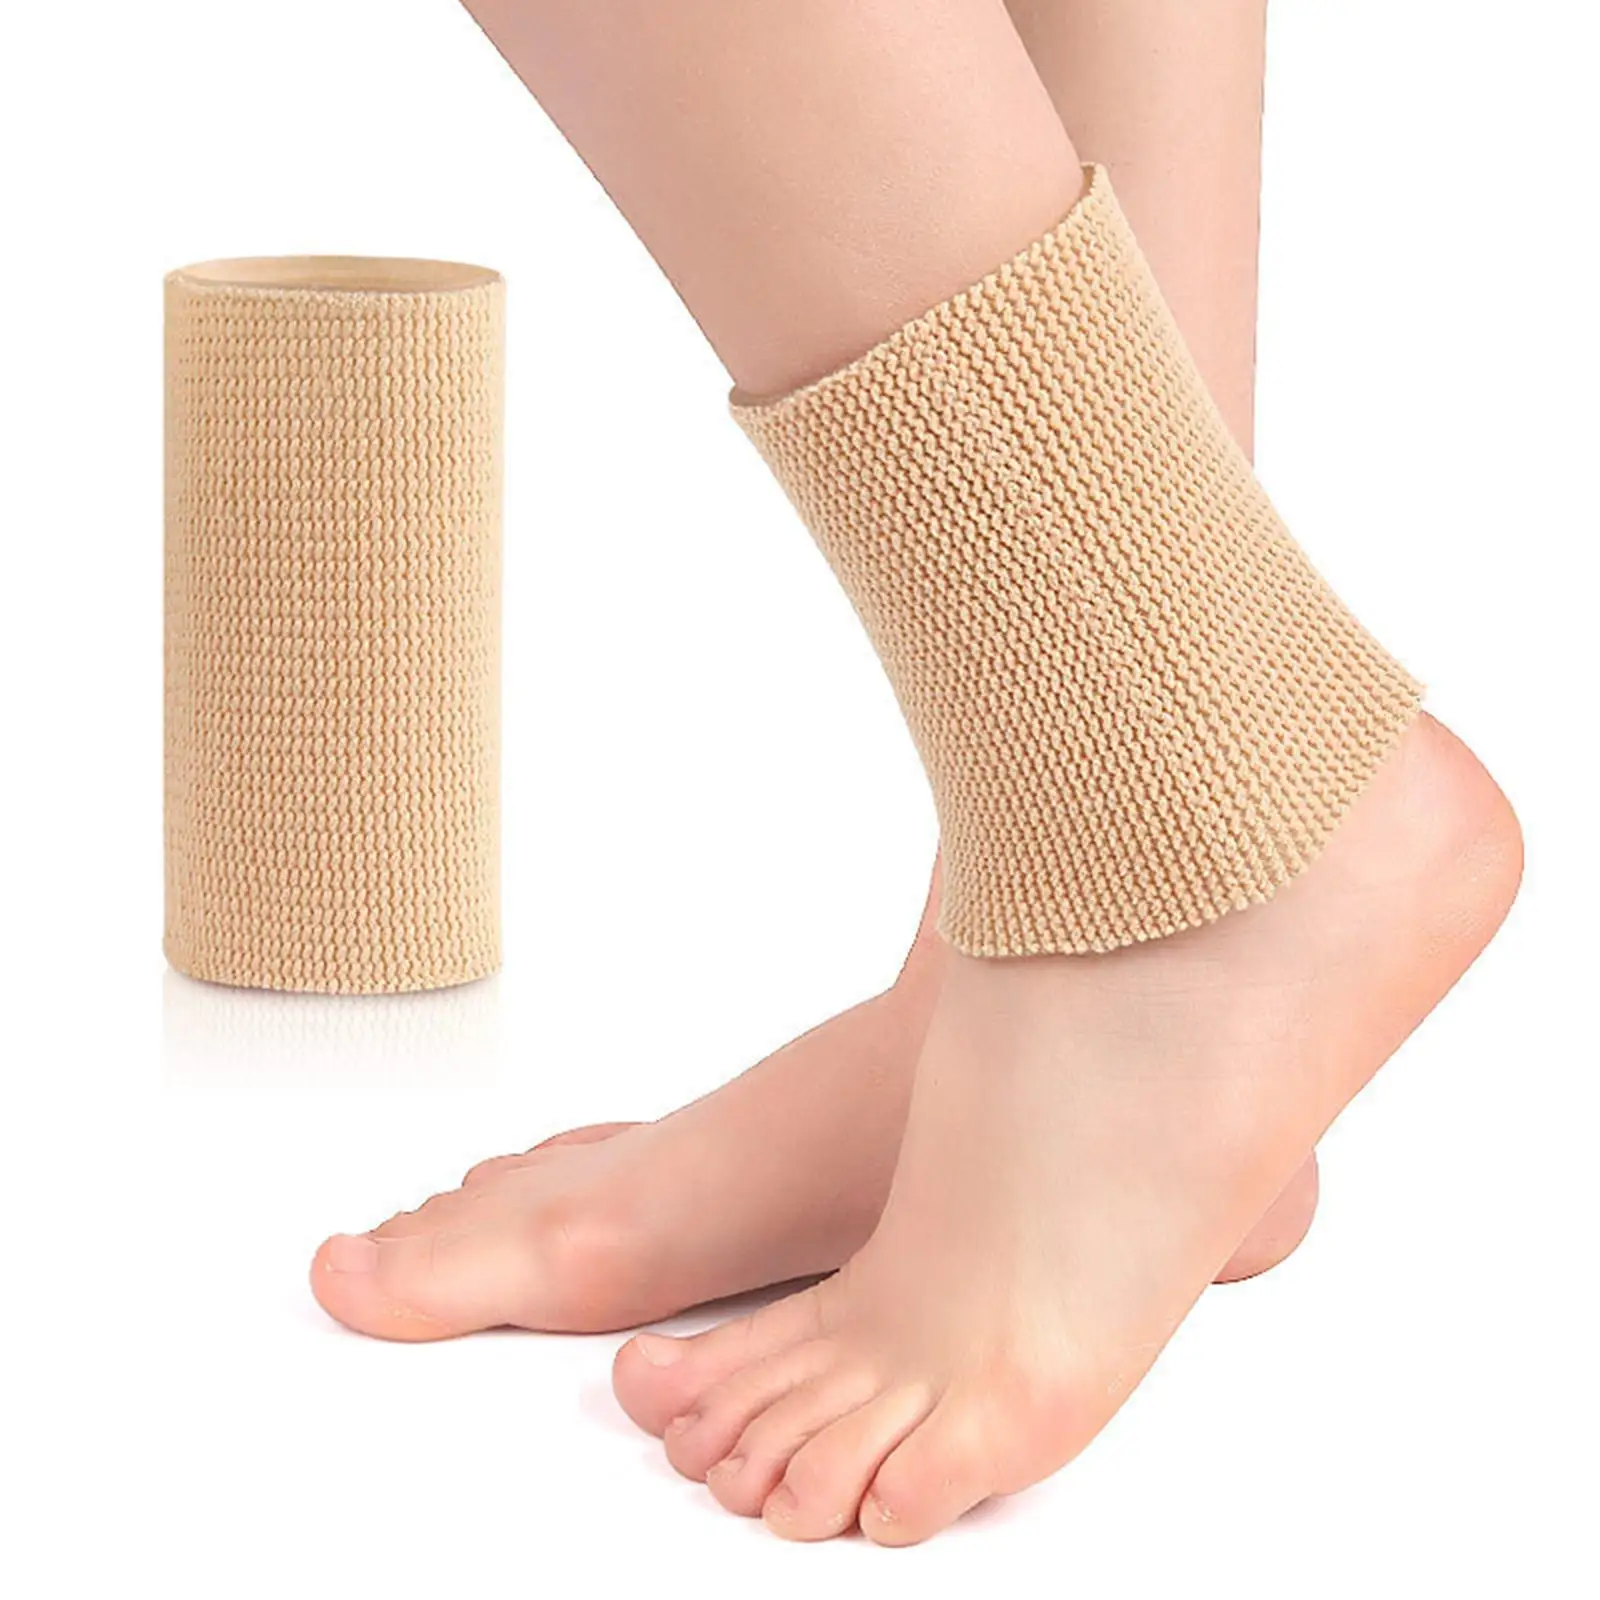 Ankles Brace Sleeve Elastic Protection Nylon Ankle Support for Running Sports Cycling